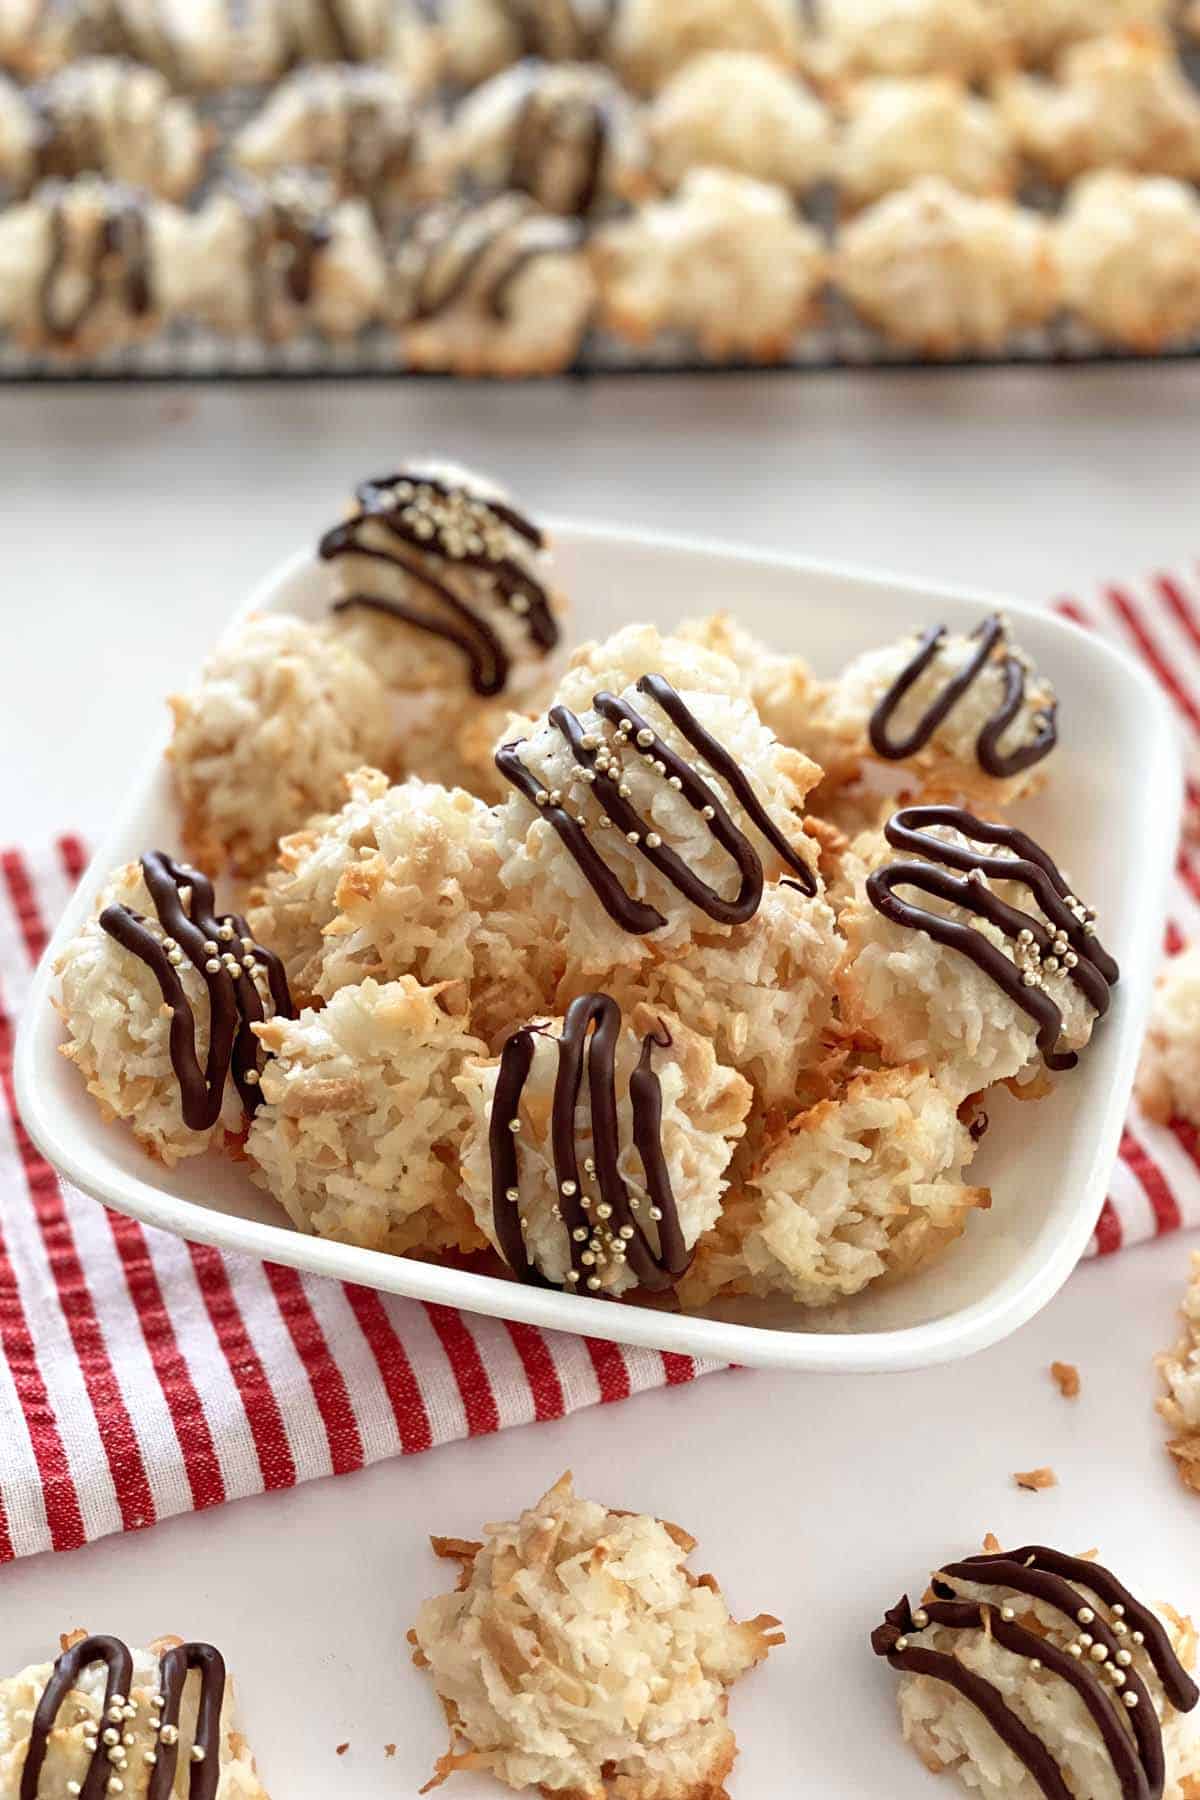 Coconut almond macaroons in a white serving bowl.